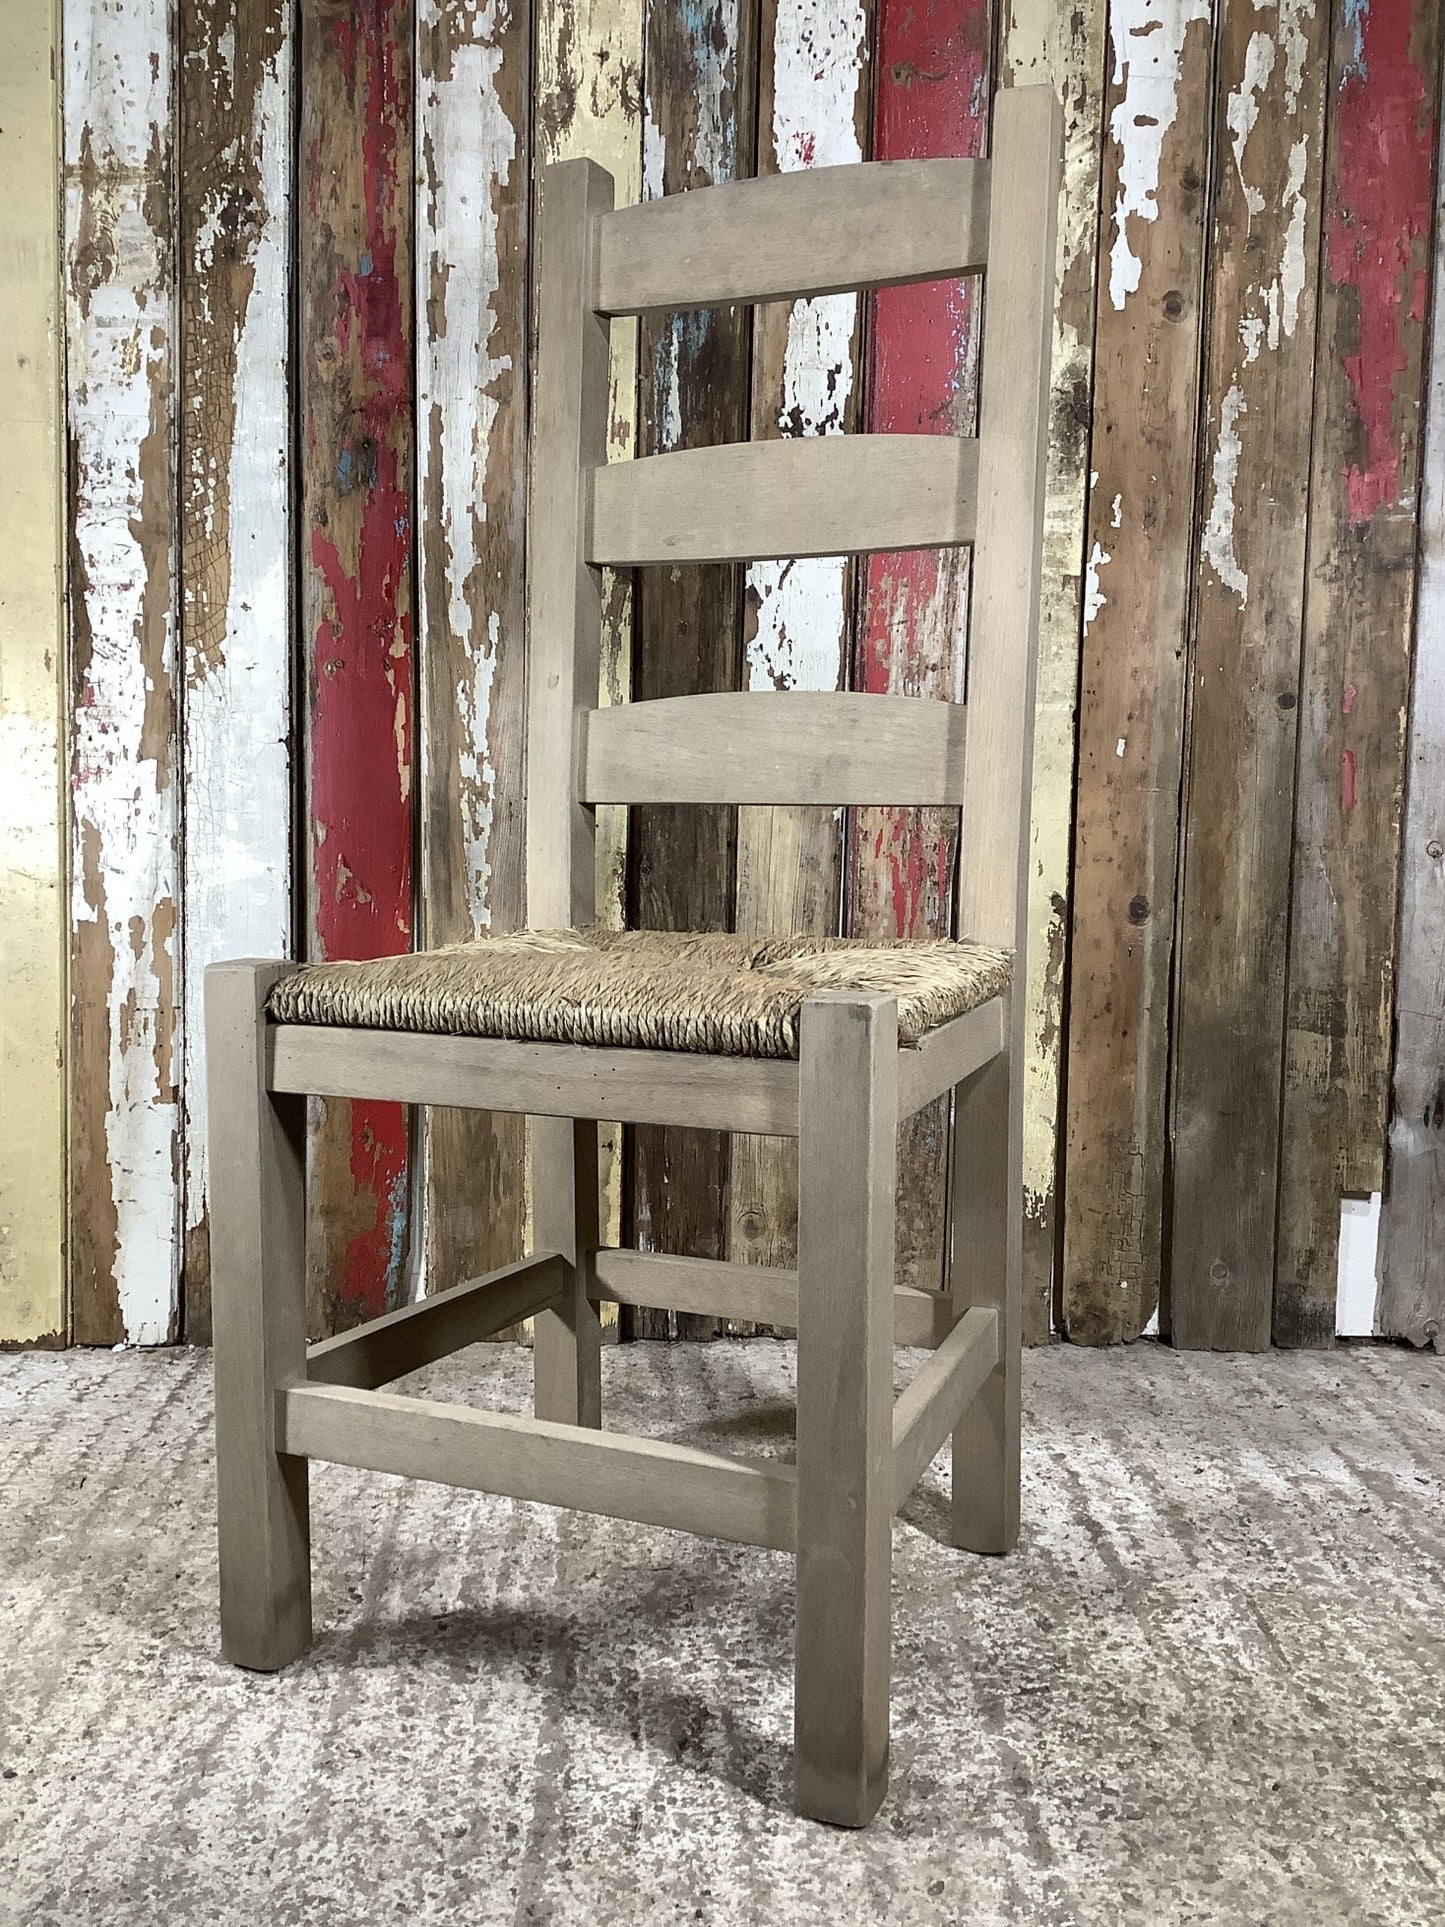 Solid Stained Ash Shaker Style Back Kitchen Dining Room Chair Sea Grass Seat